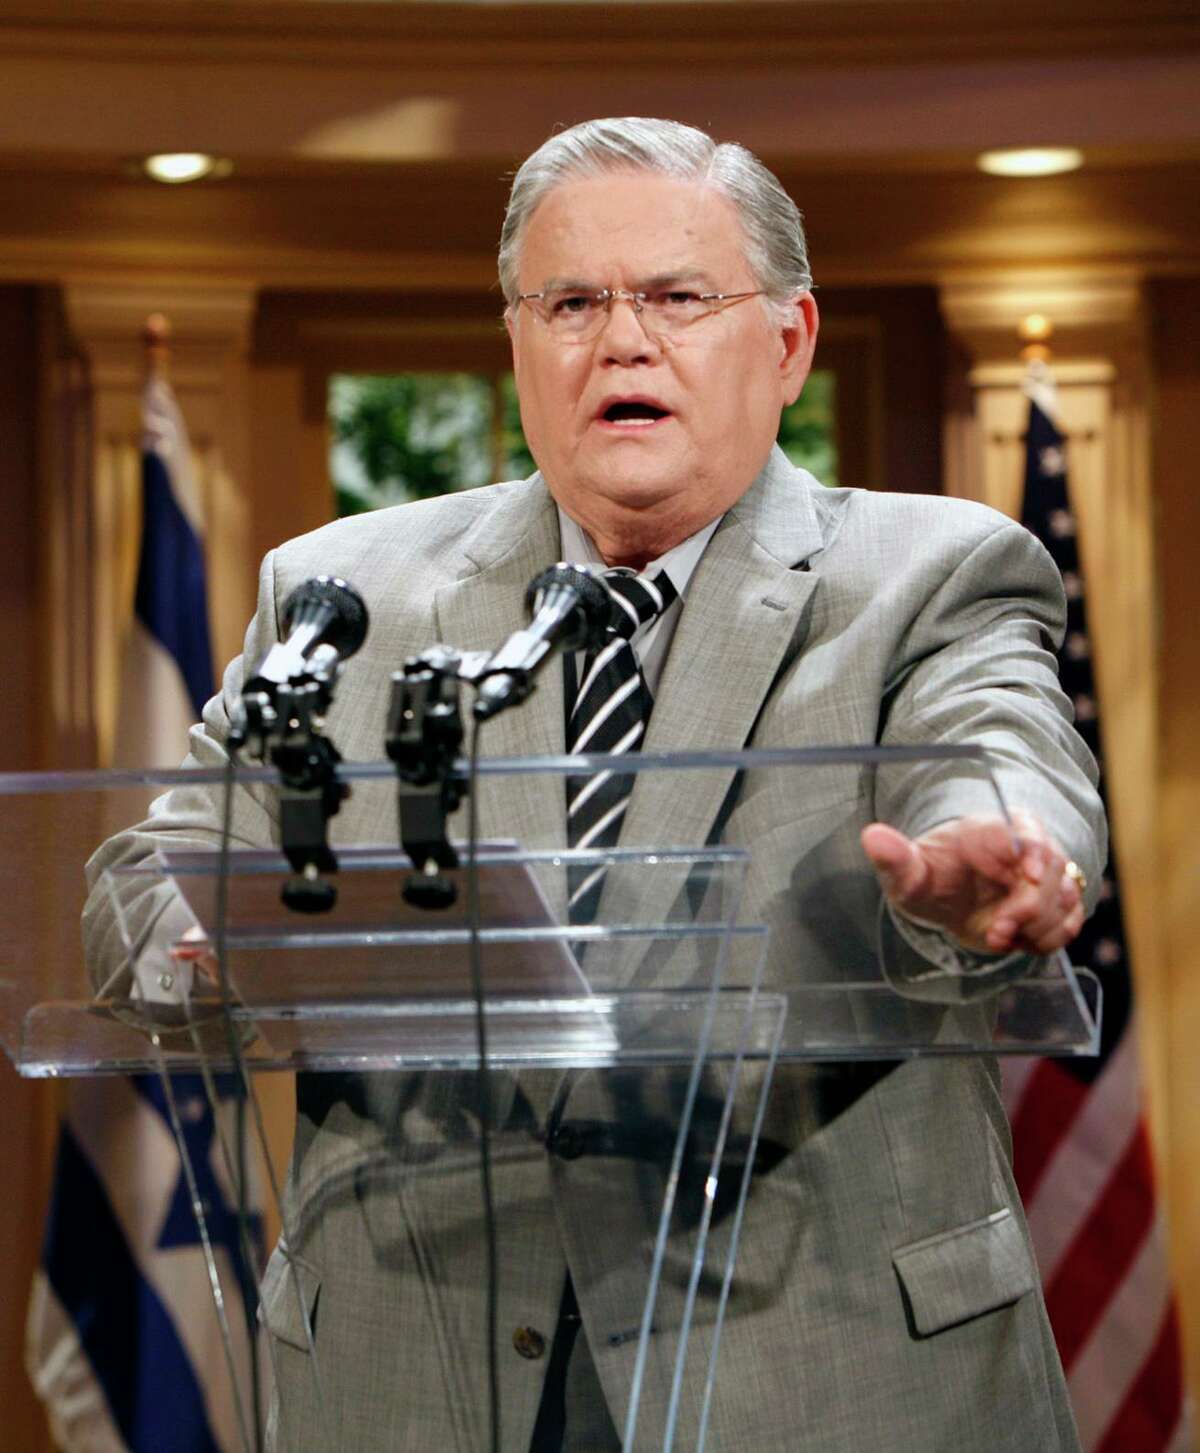 ** FILE ** In this May 23, 2008, file photo the Rev. John Hagee speaks during a news conference at the Cornerstone Church in San Antonio, Texas. Hagee, the inter- nationally known radio/TV evangelist, is recovering after undergoing open heart surgery Thursday, Oct. 2, 2008. (AP Photo /J. Michael Short, File)